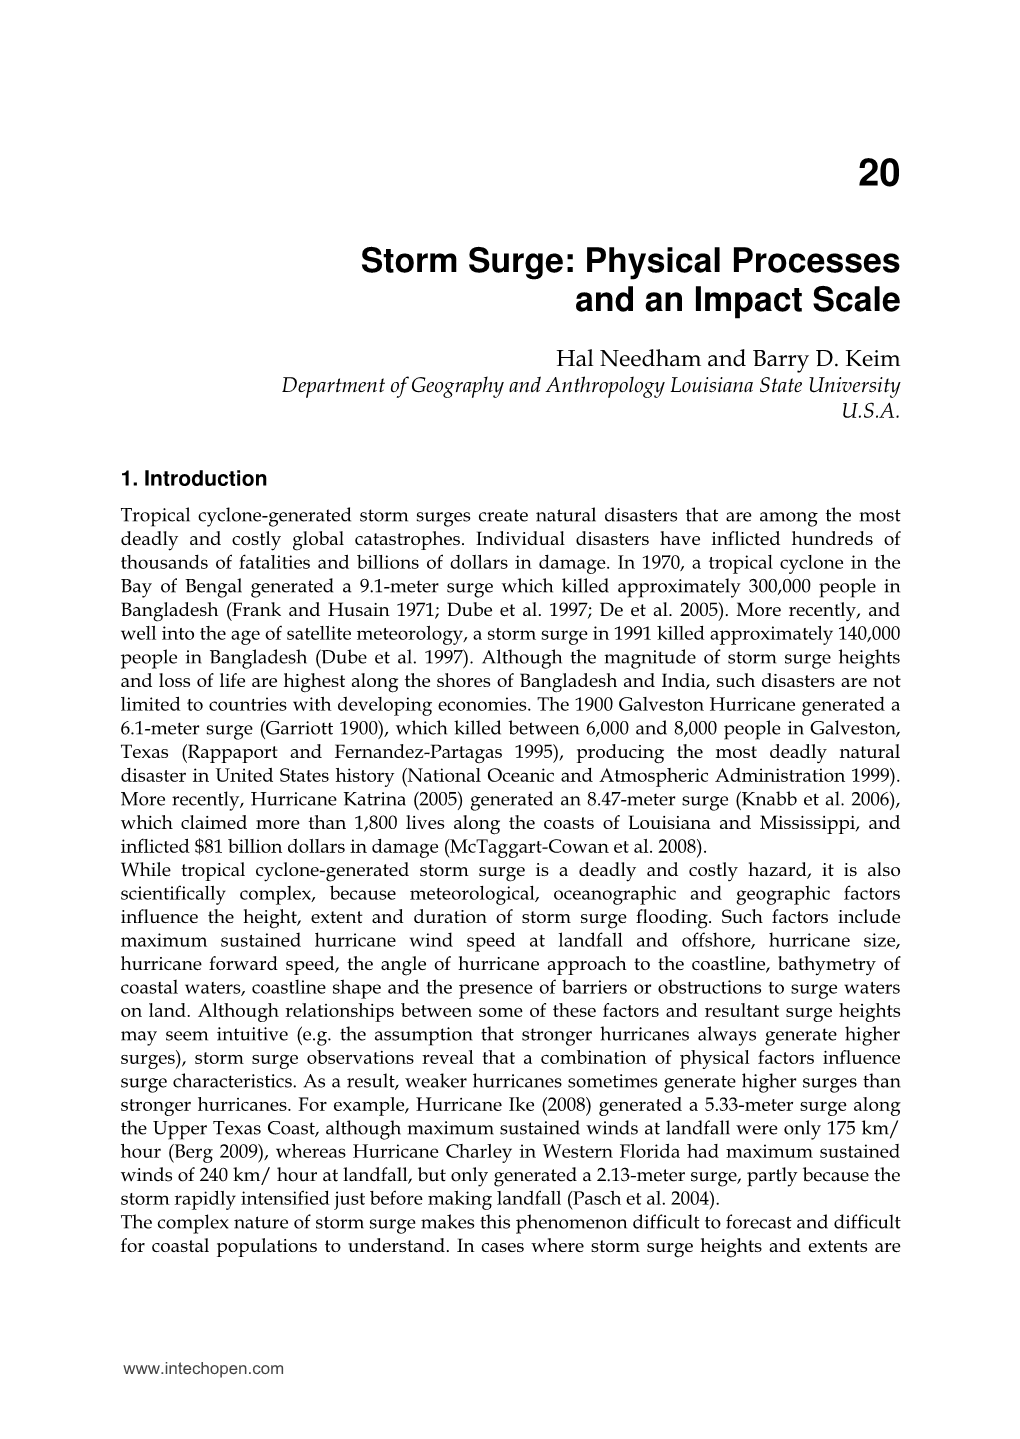 Storm Surge: Physical Processes and an Impact Scale